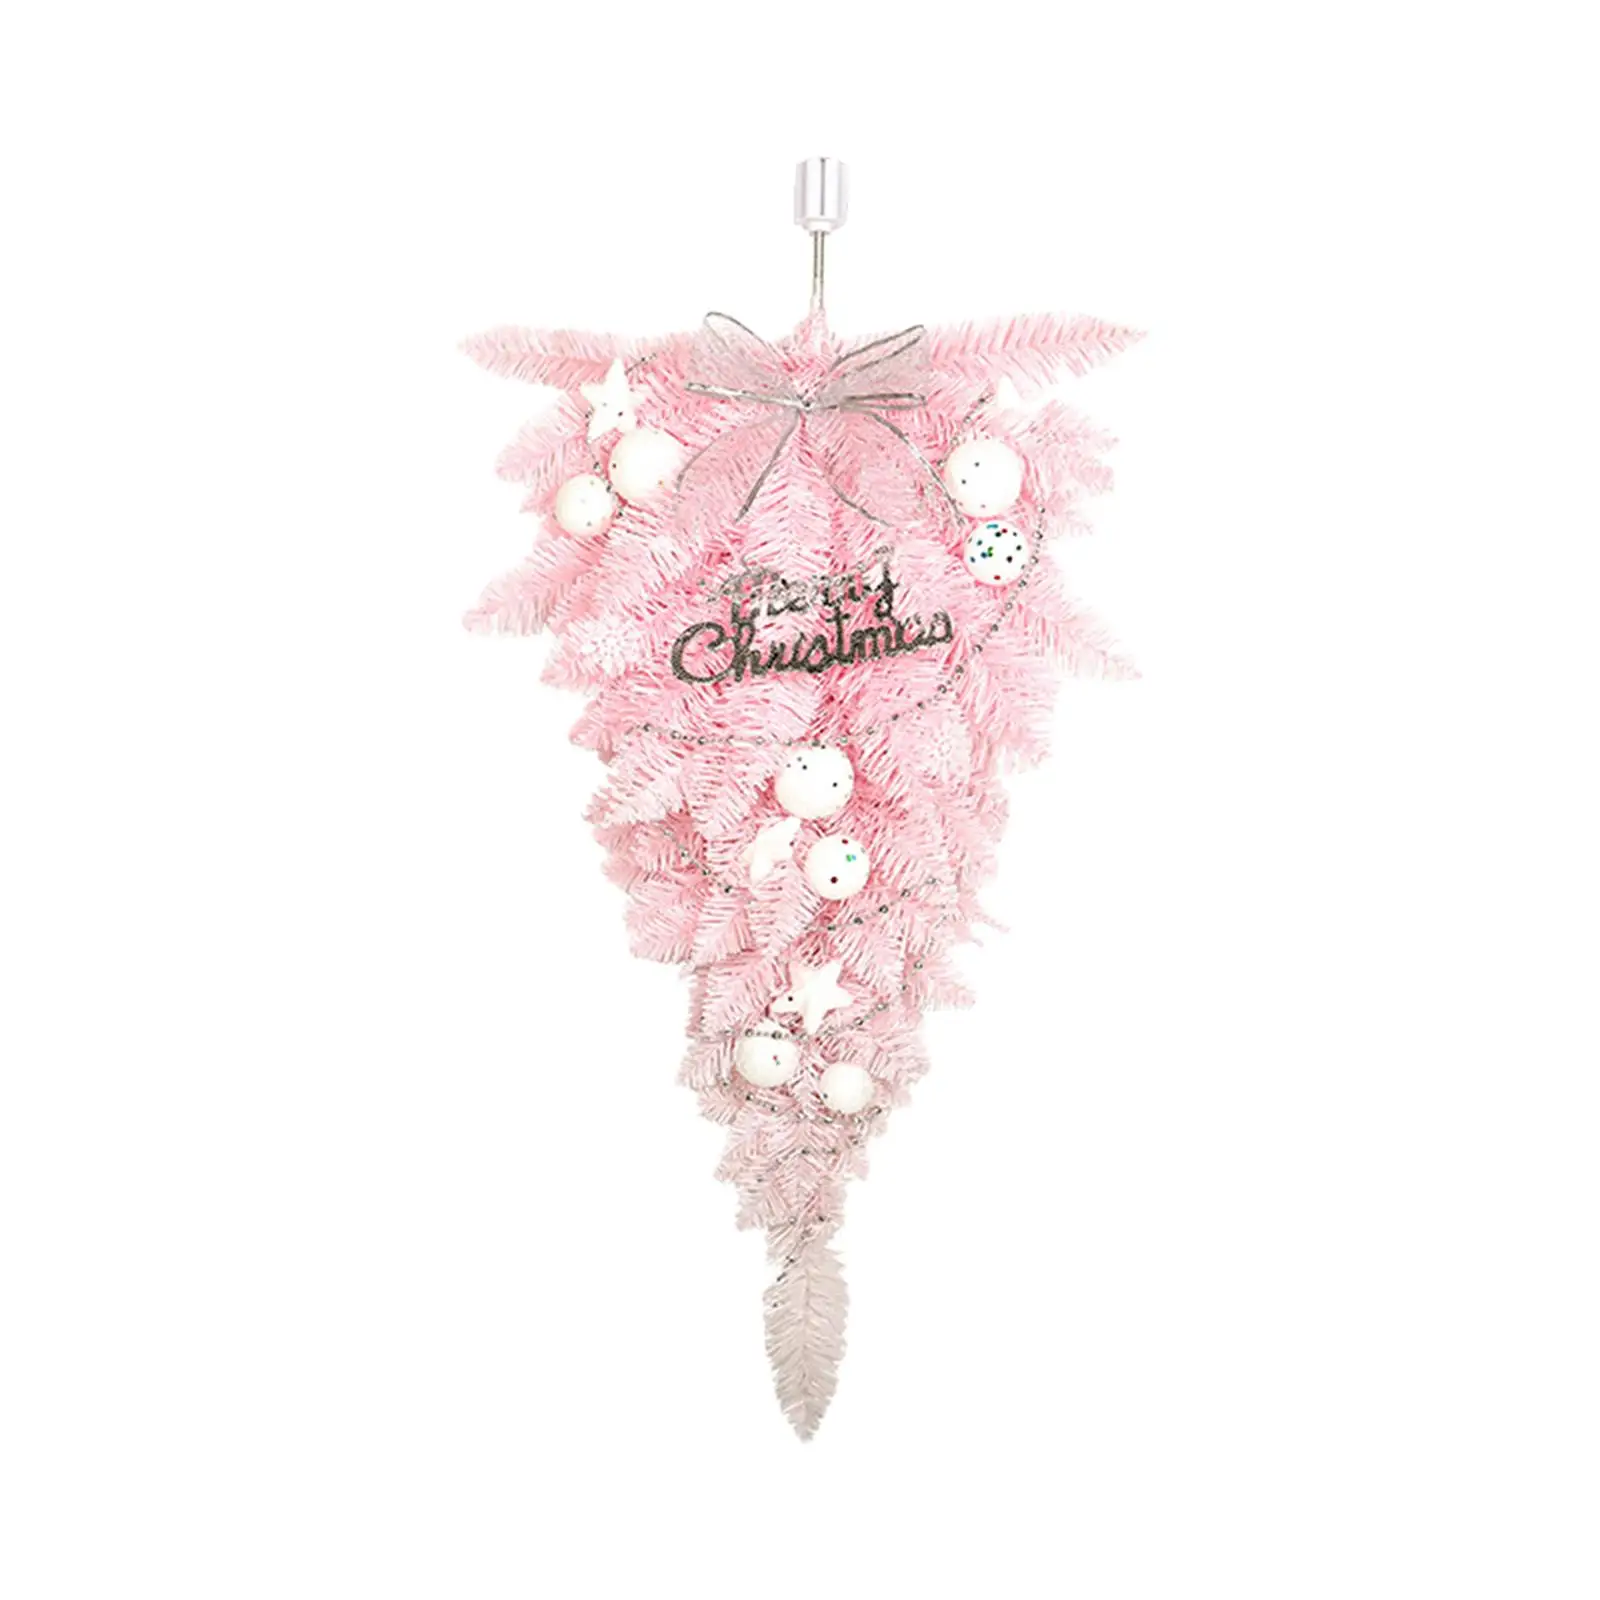 57cm Pink Christmas Upside Down Tree Decoration Christmas Ornament Hanging Wreath for Xmas Party Supplies Versatile Durable